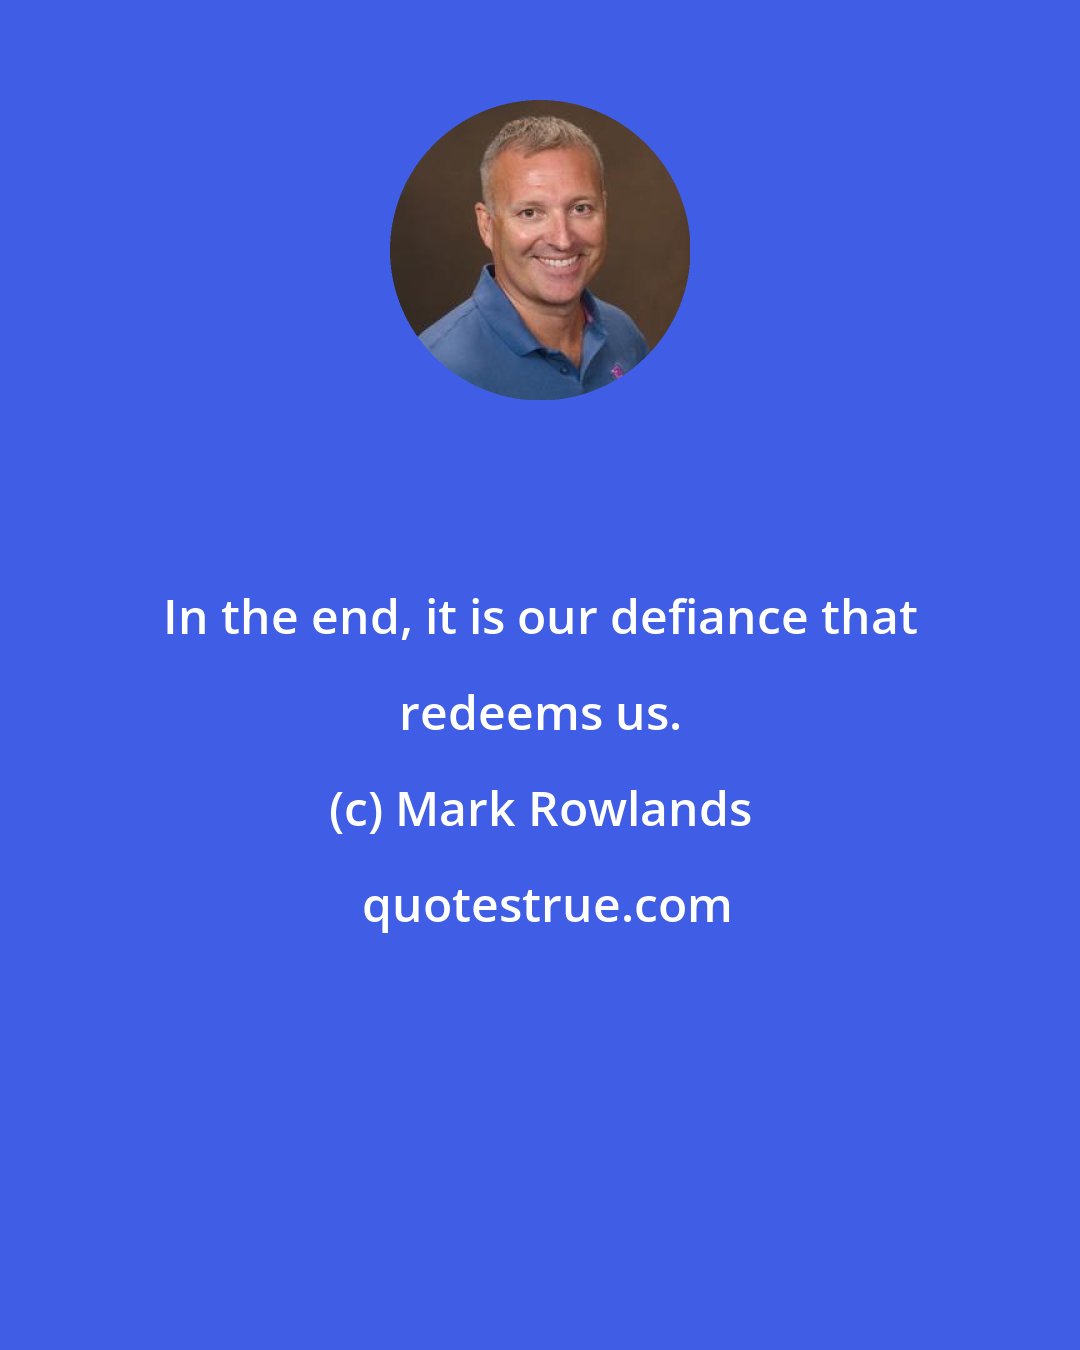 Mark Rowlands: In the end, it is our defiance that redeems us.